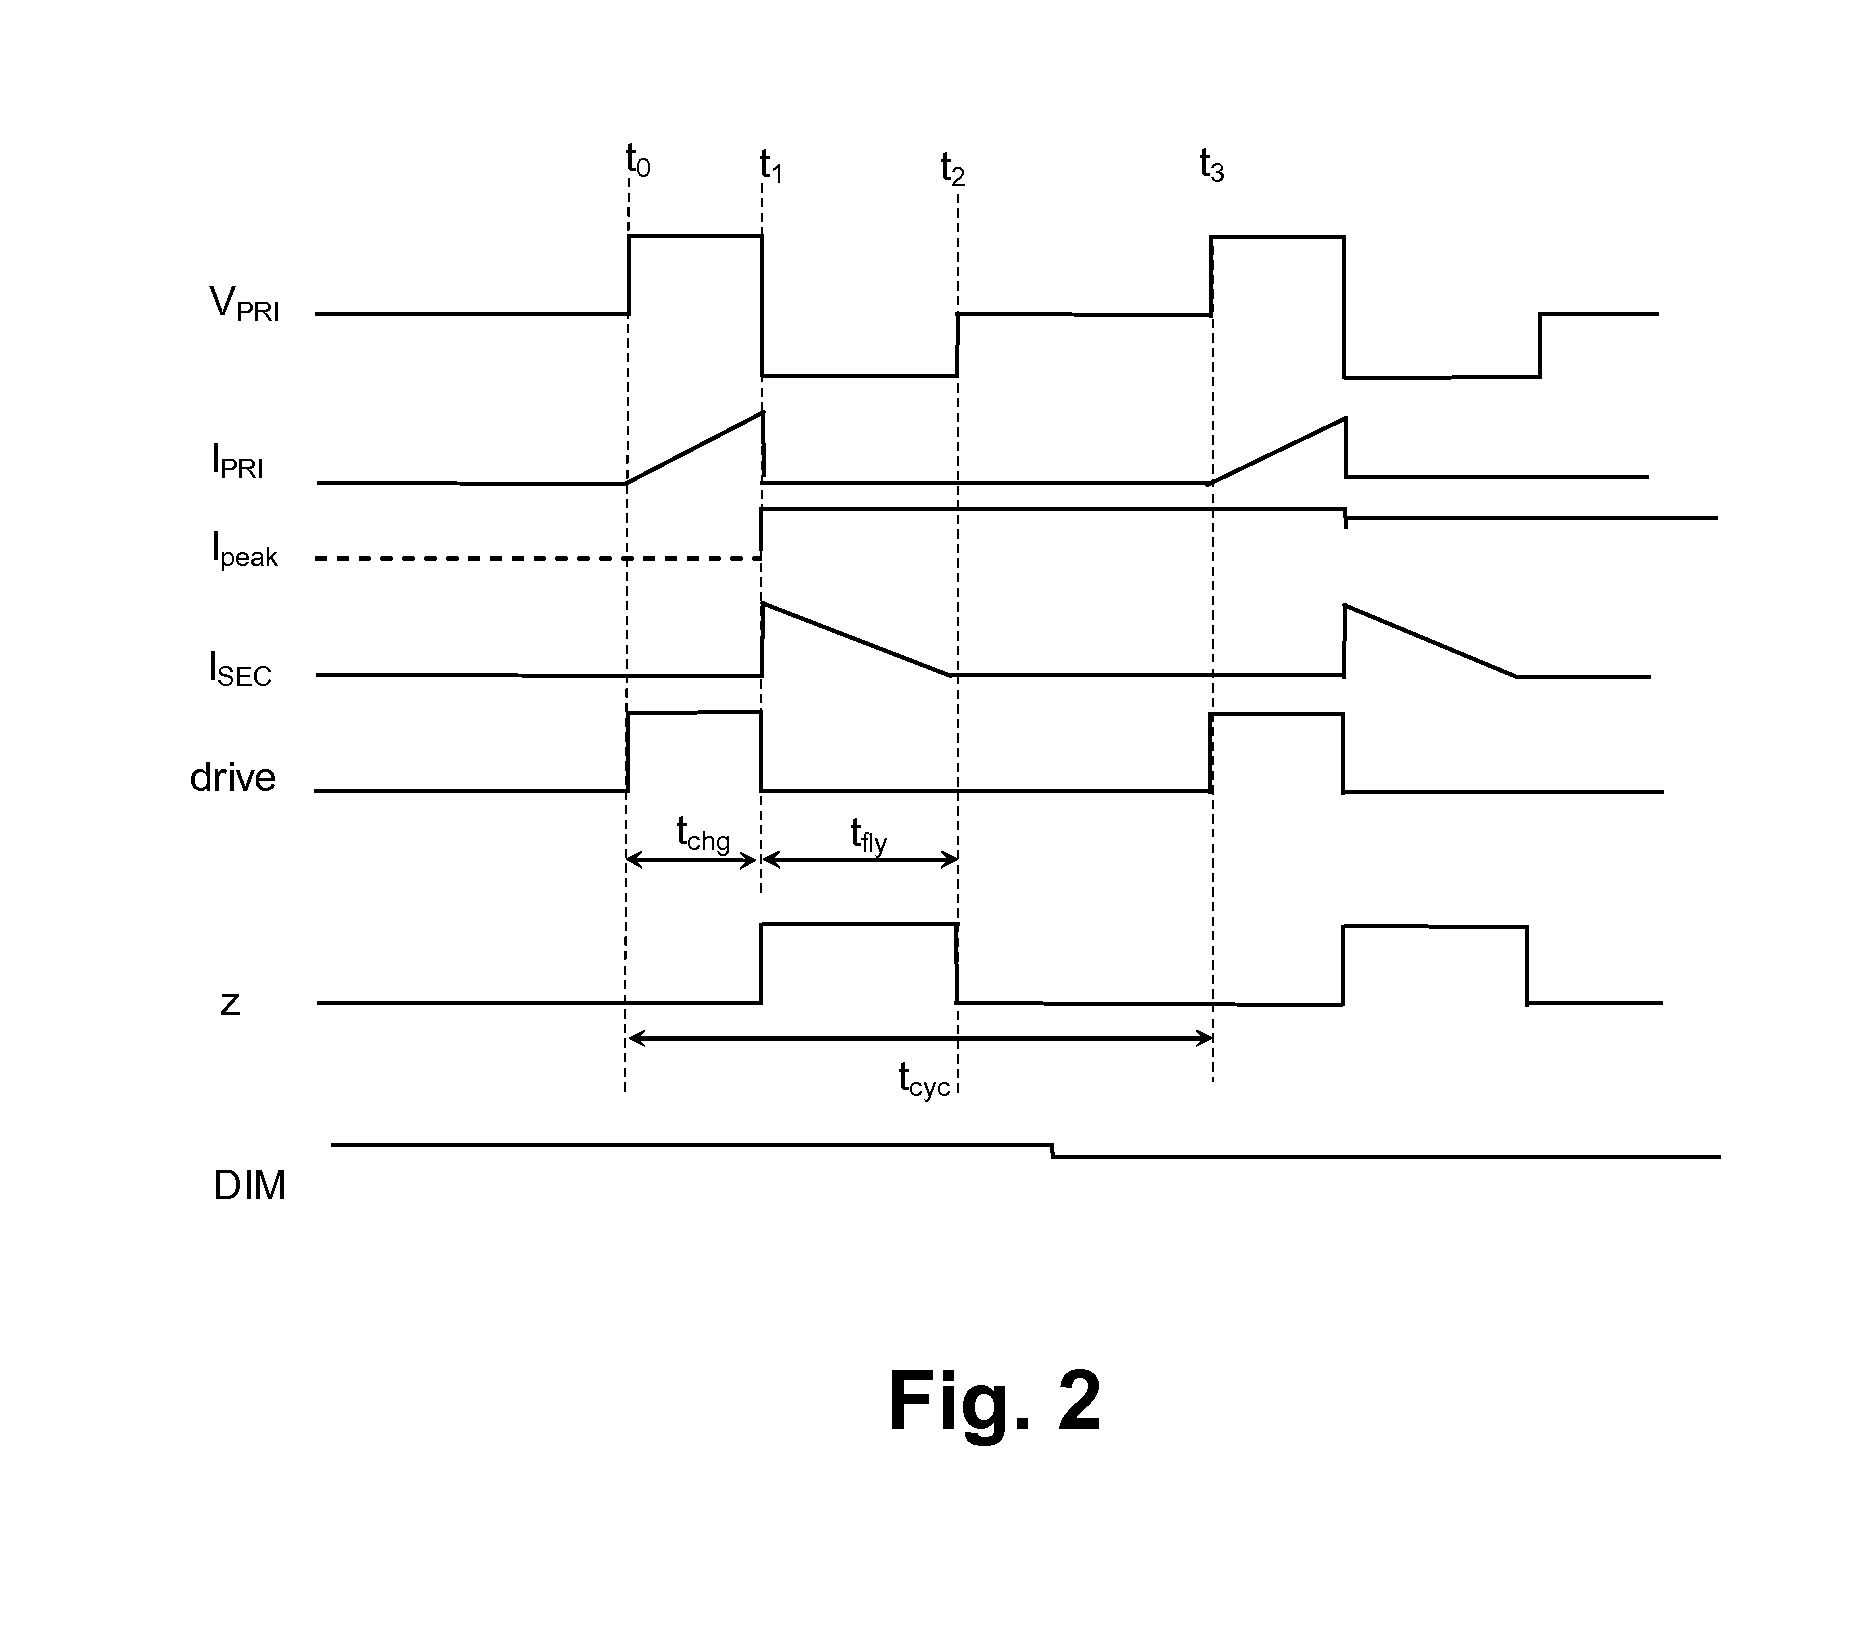 Integrated circuit switching power supply controller with selectable buck mode operation